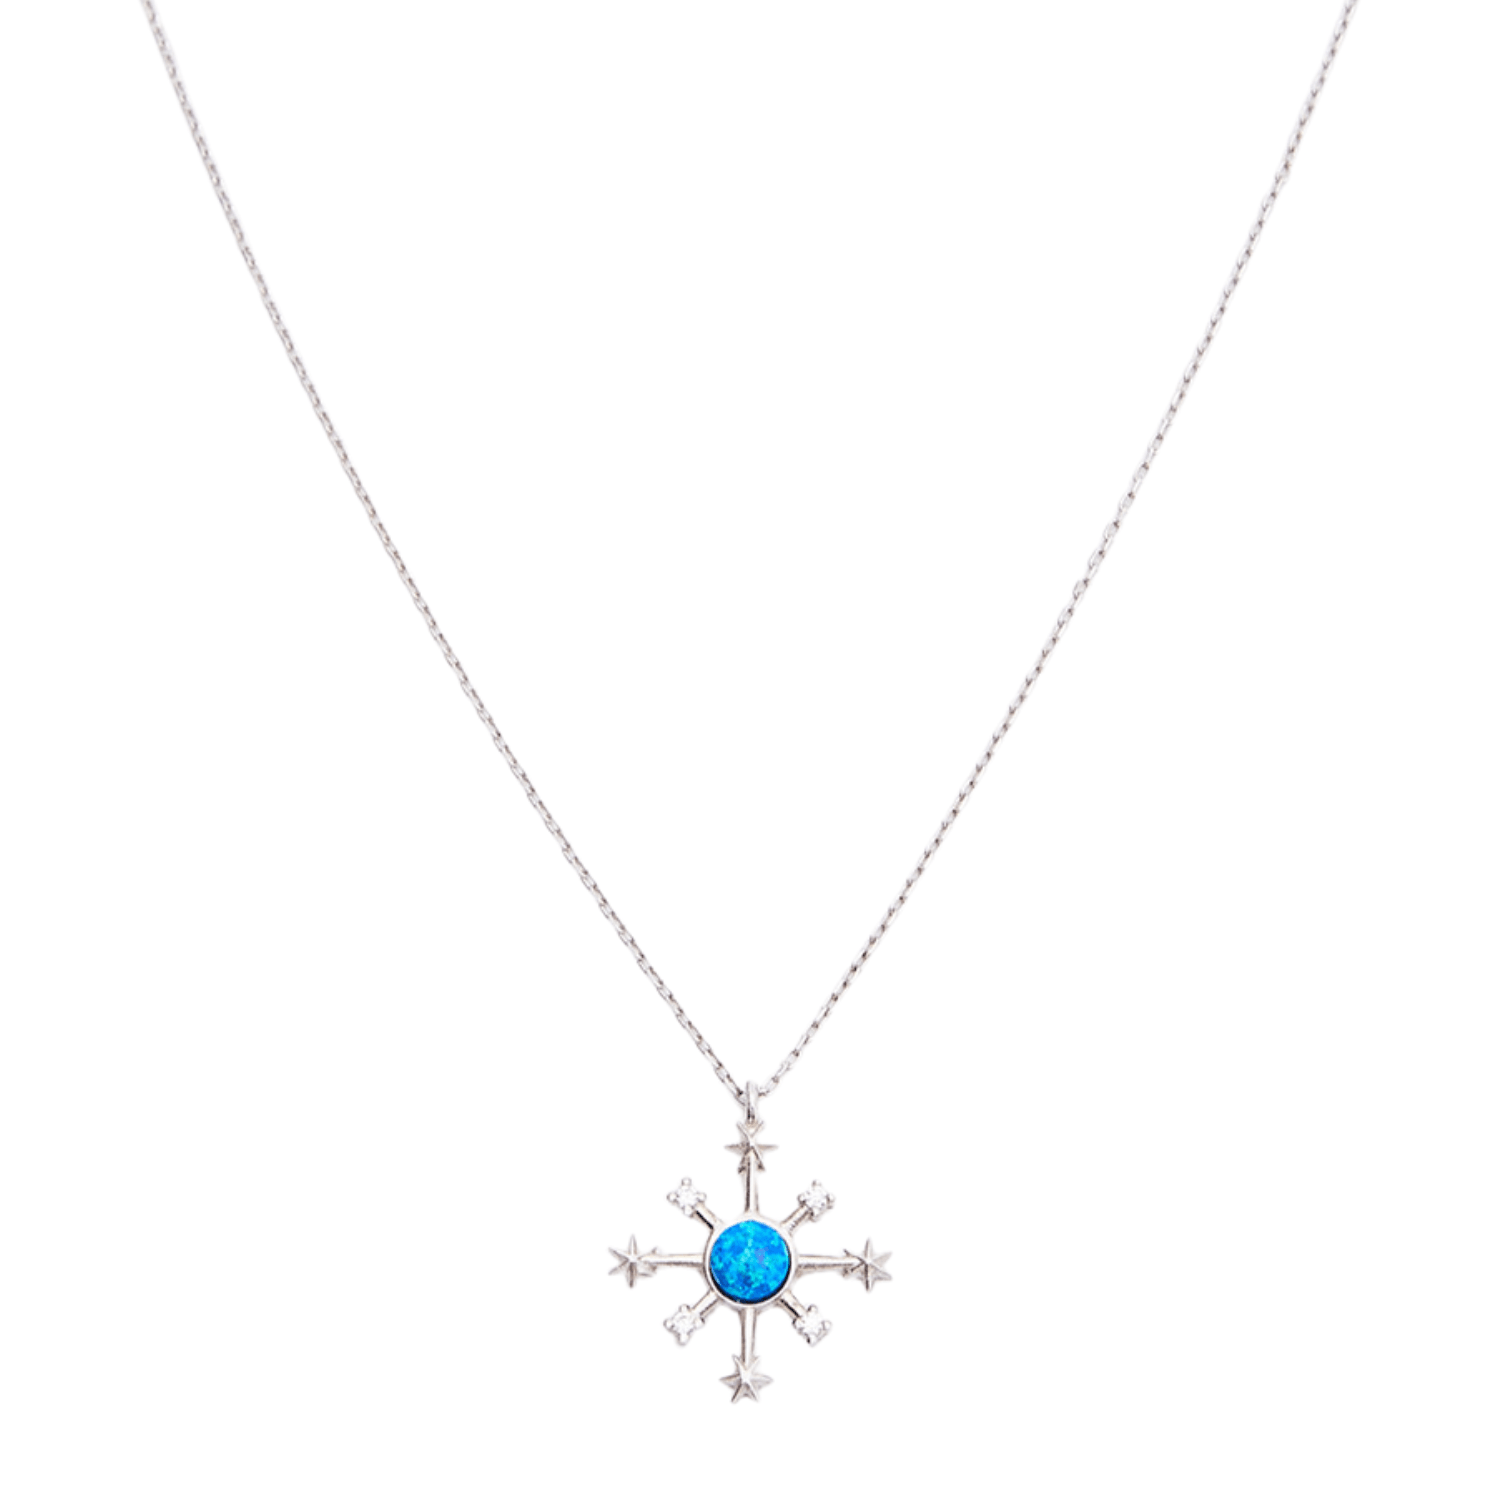 Opal Ship Wheel High Quality Sterling Silver Necklace